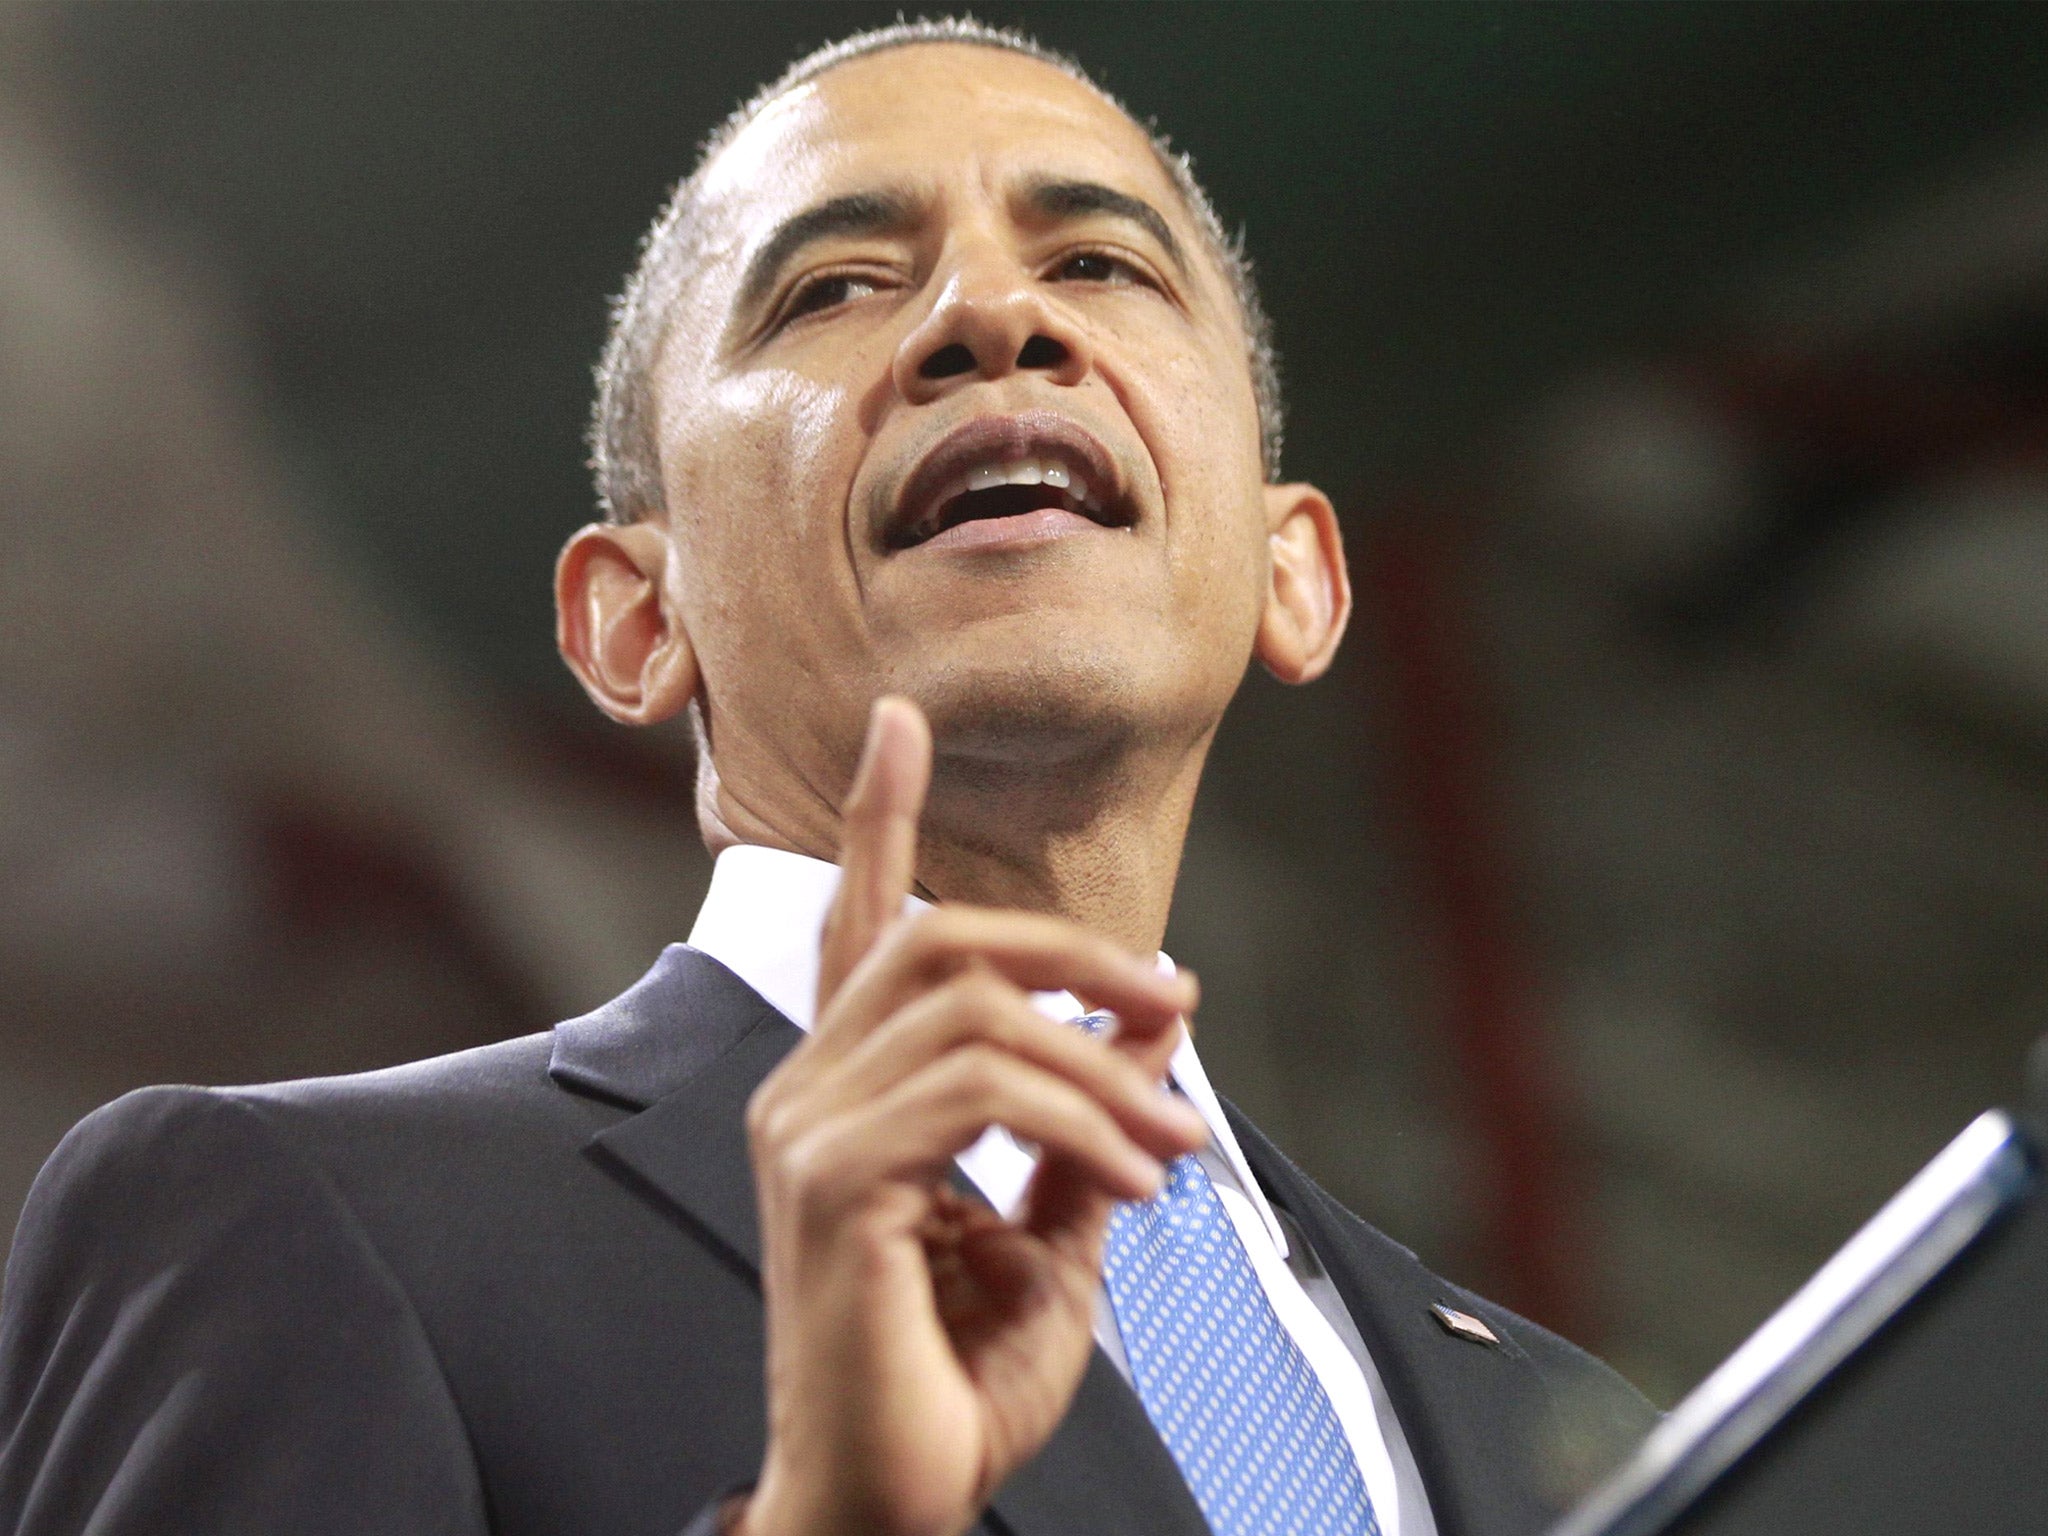 President Obama has made overhauling immigration a priority